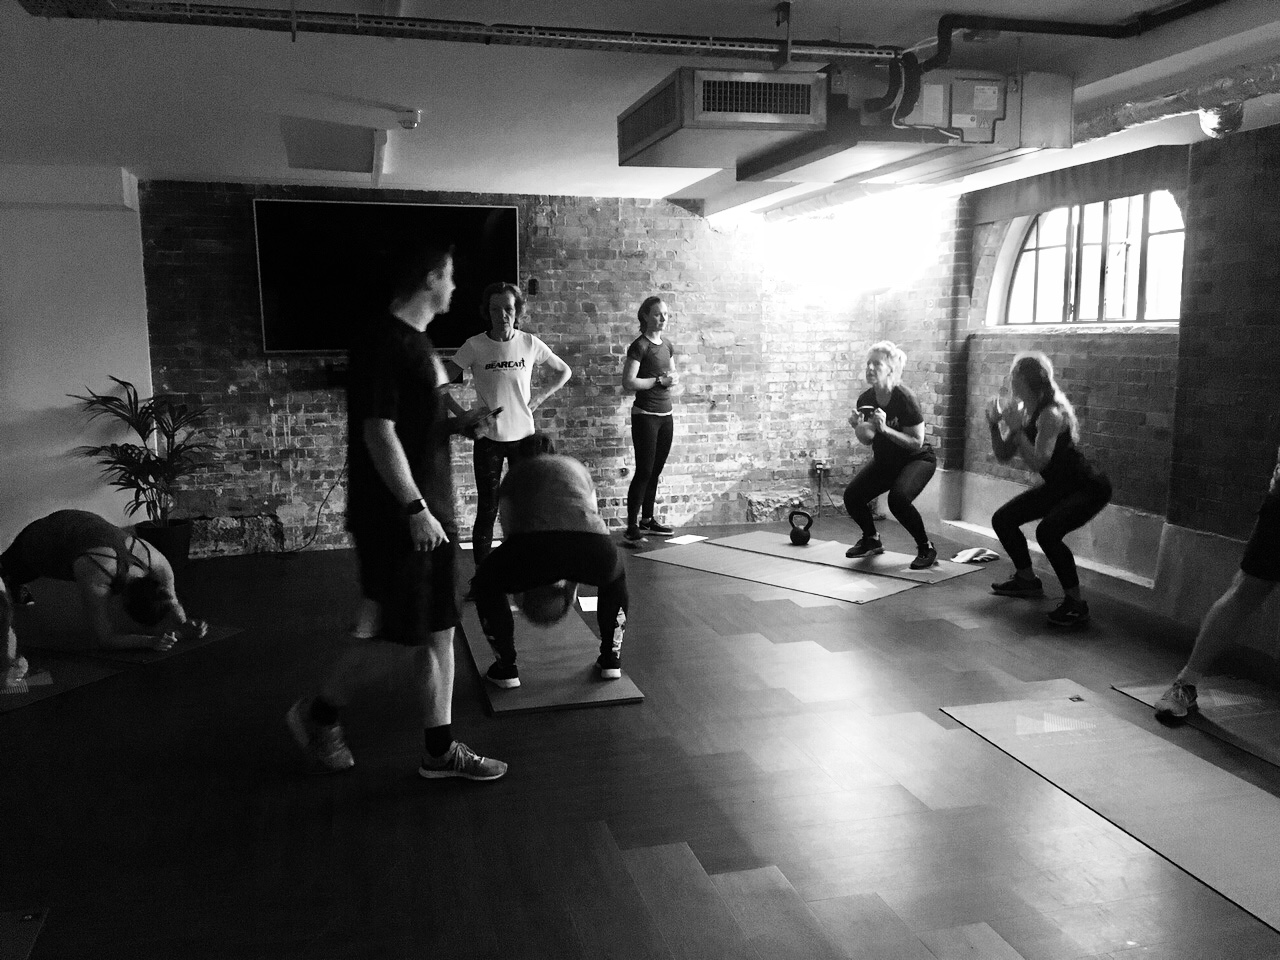 Movement, Mindfulness and Conversation at HIIT+CHILL+CHAT